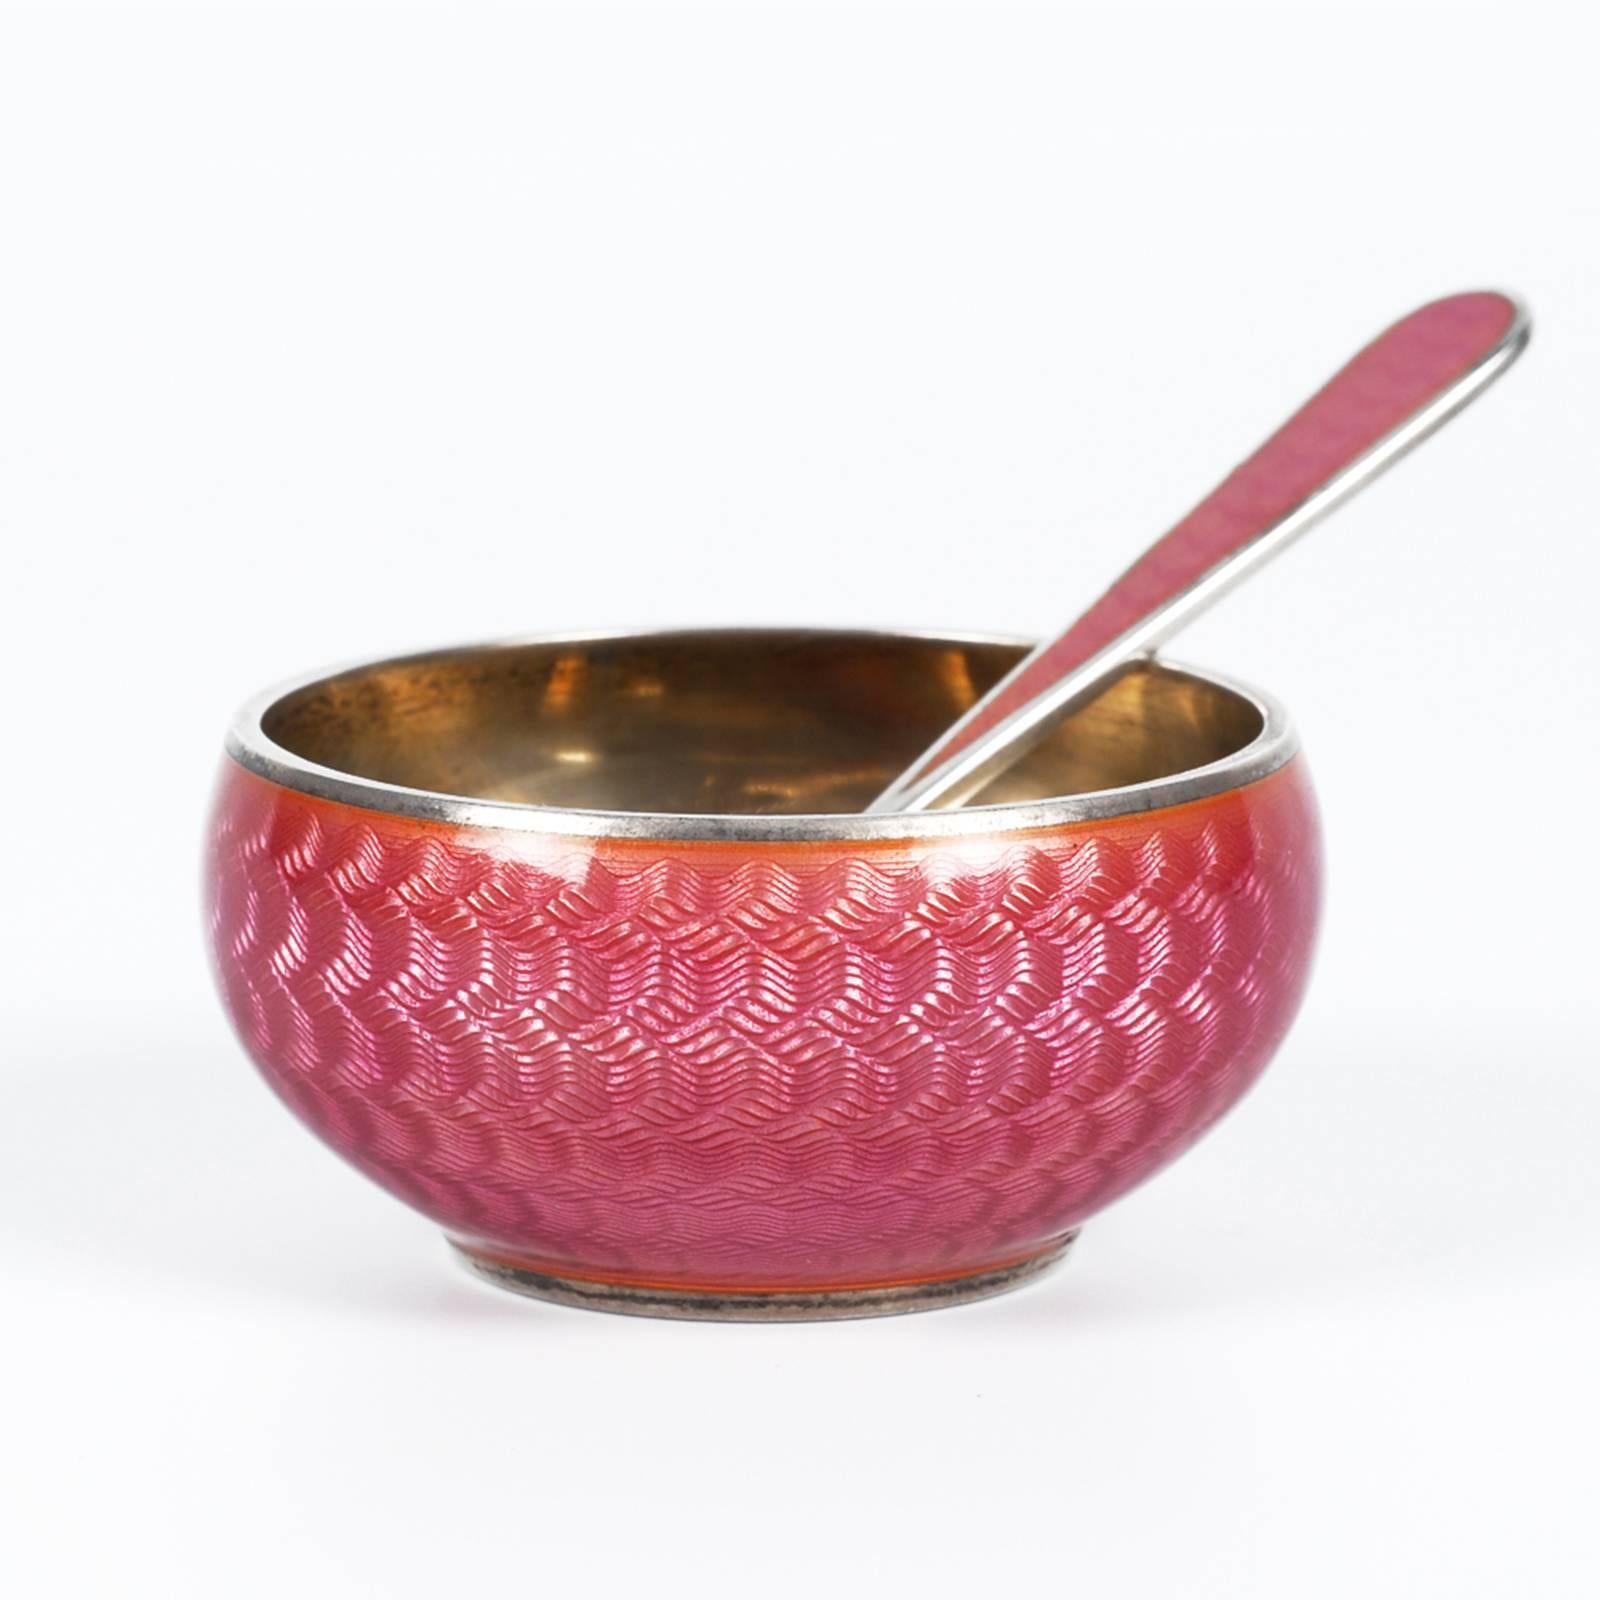 A Russian silver gilt and guilloché enamel open salt with matching spoon, Grachev, St. Petersburg, circa 1899-1903. Of circular form, the exterior of the body enameled in a raspberry pink translucent enamel over an engine turned ground, the back of